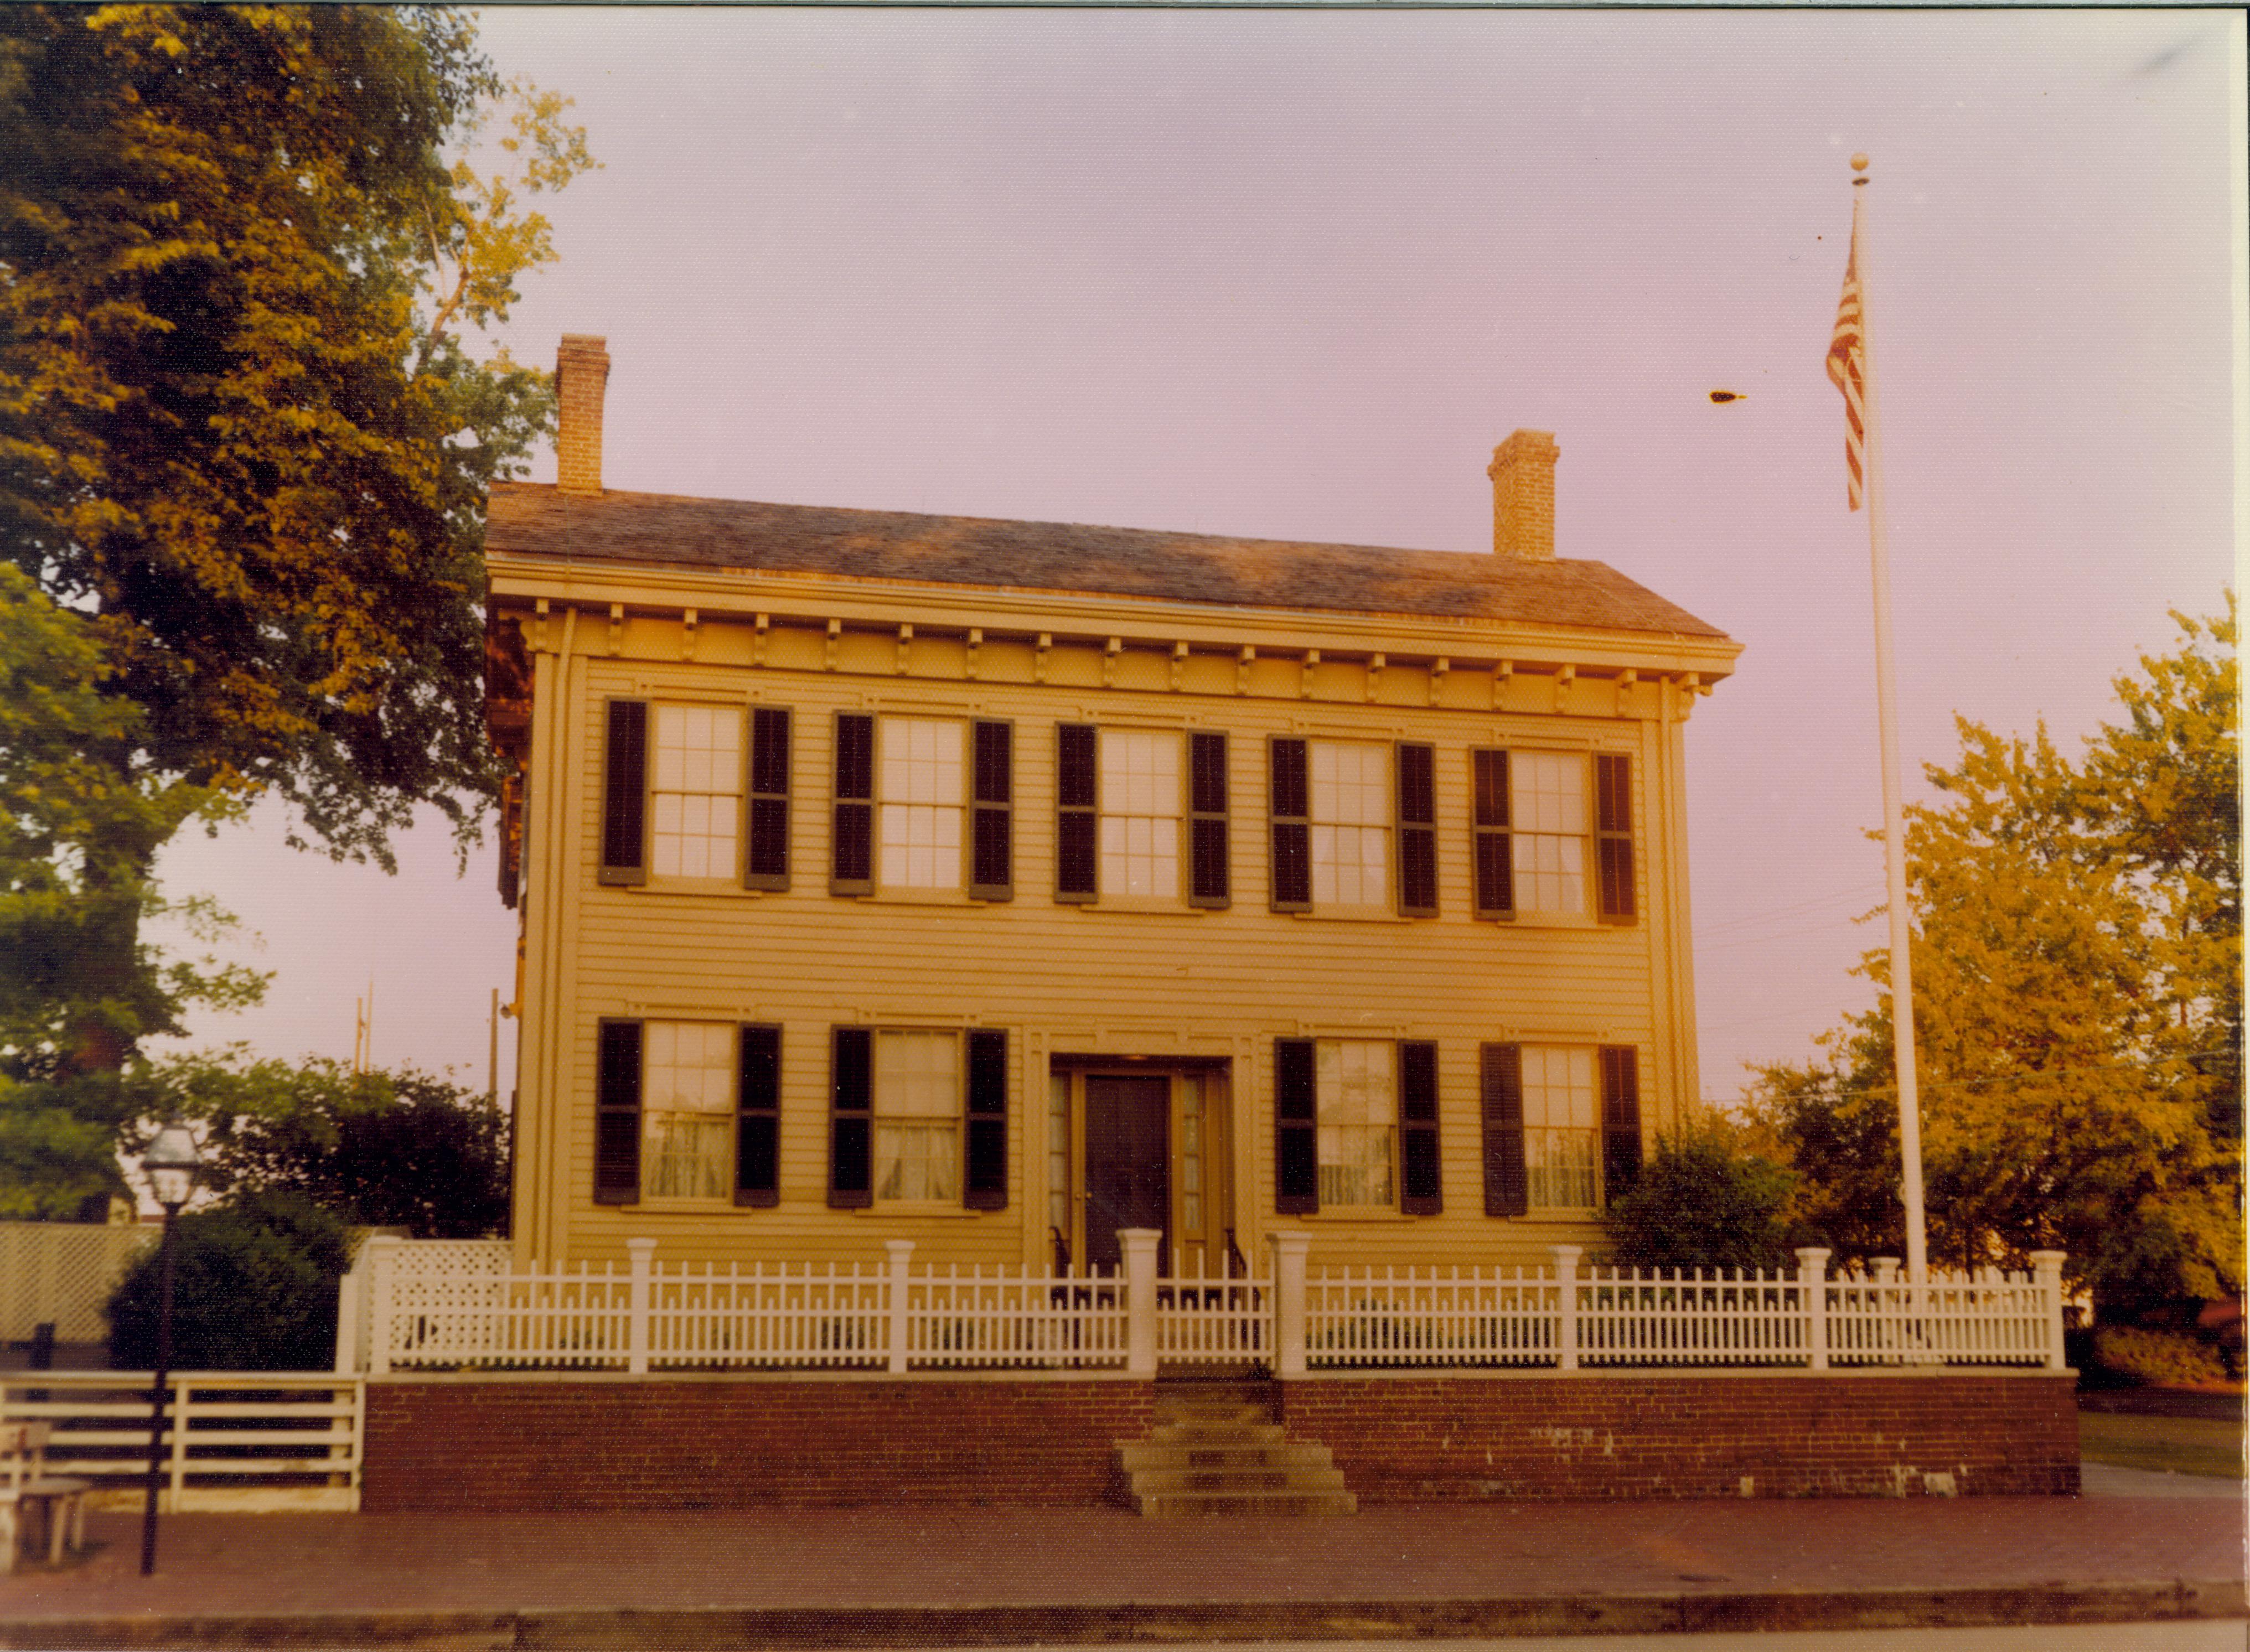 Lincoln Home west (front) elevation. Flagpole on right corner behind picket fence, utility poles in background left  Looking east from 8th Street Lincoln Home, summer, flagpole